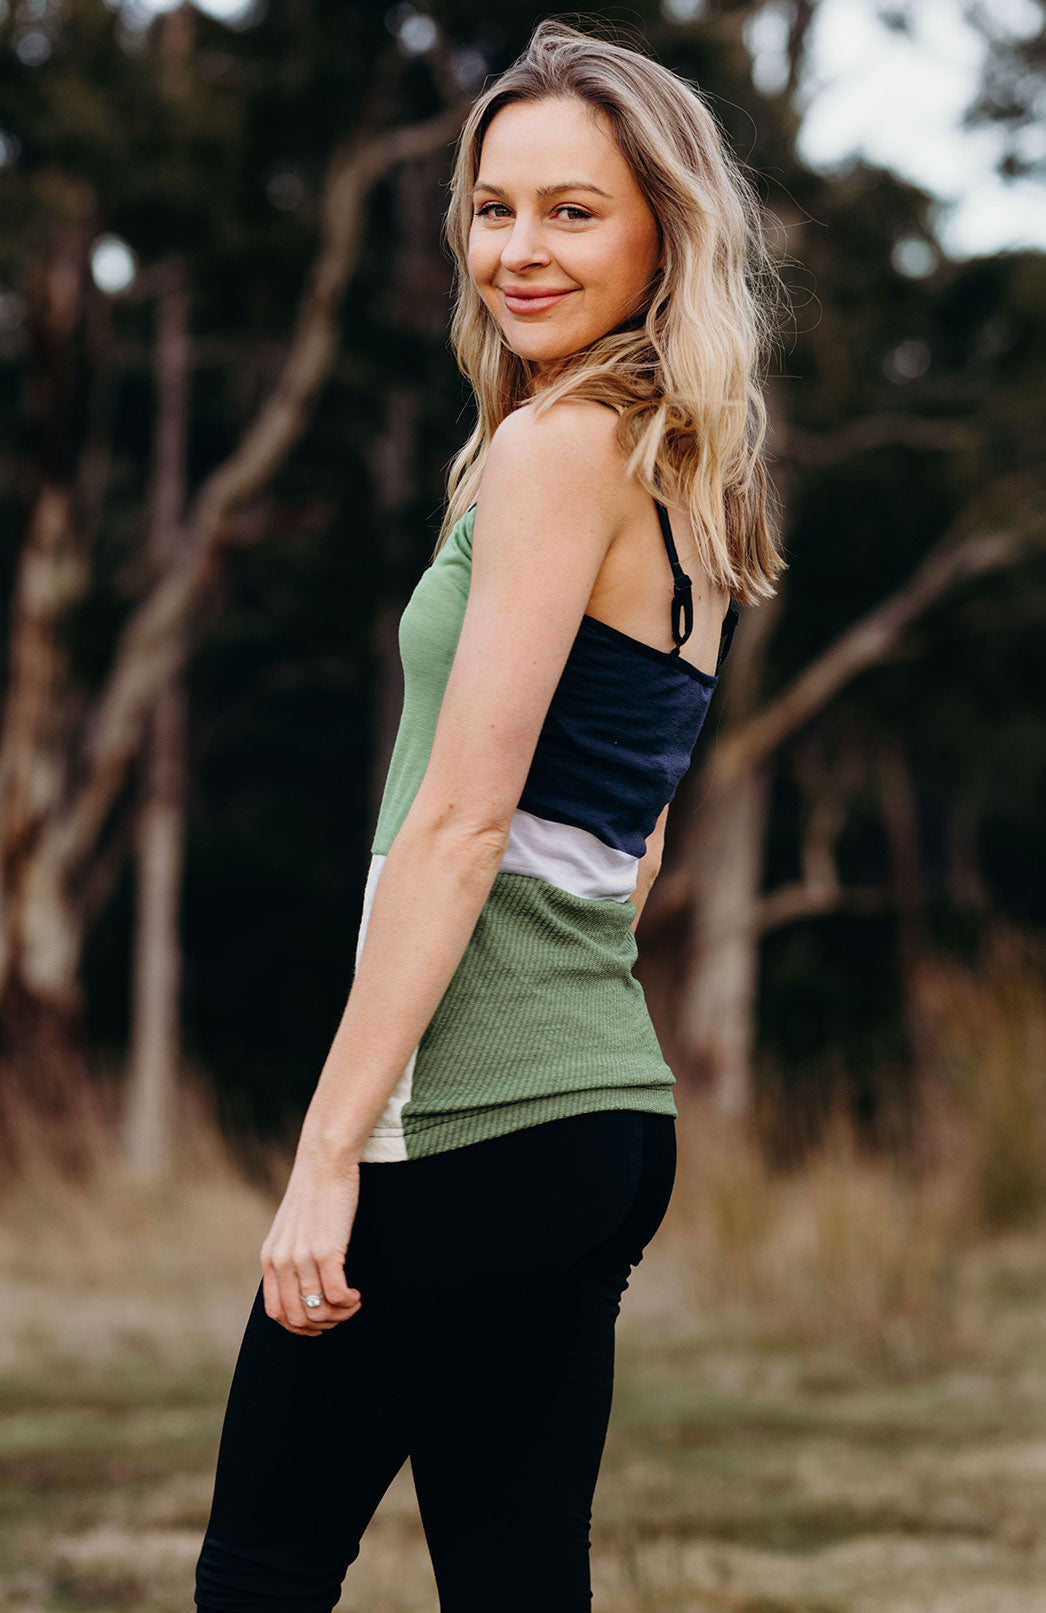 Lucky Brand Tank Tops & Camisoles for Women